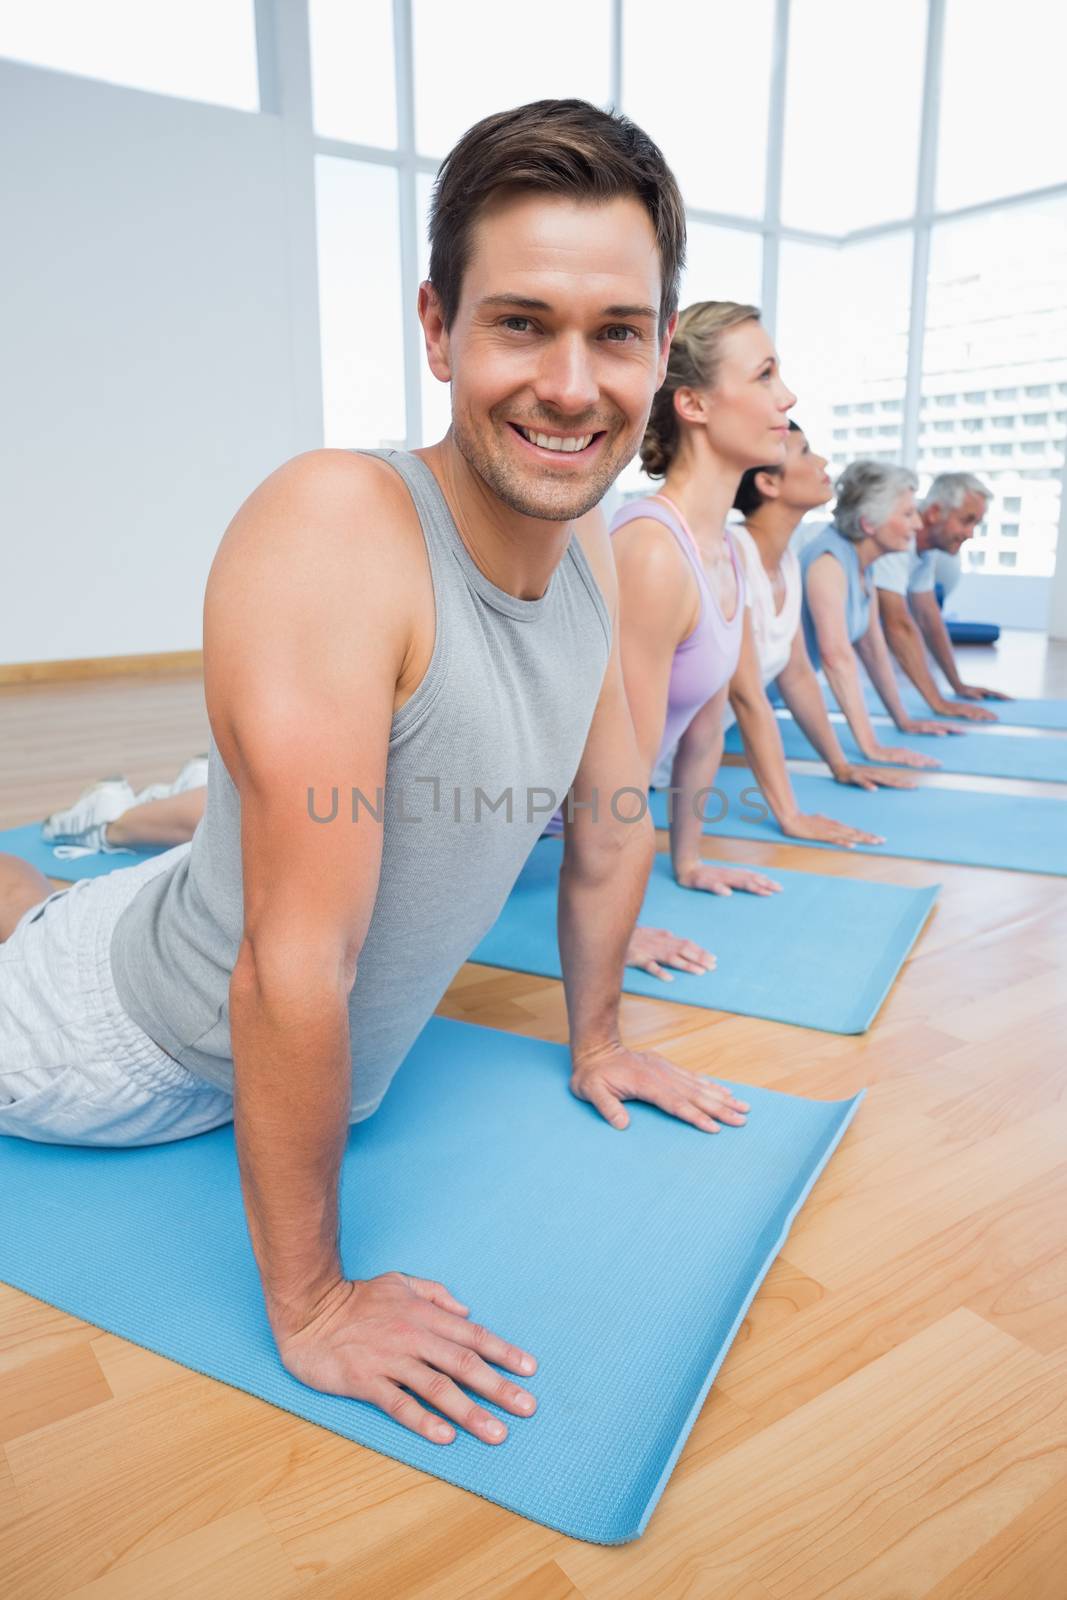 Froup doing cobra pose in row at yoga class by Wavebreakmedia